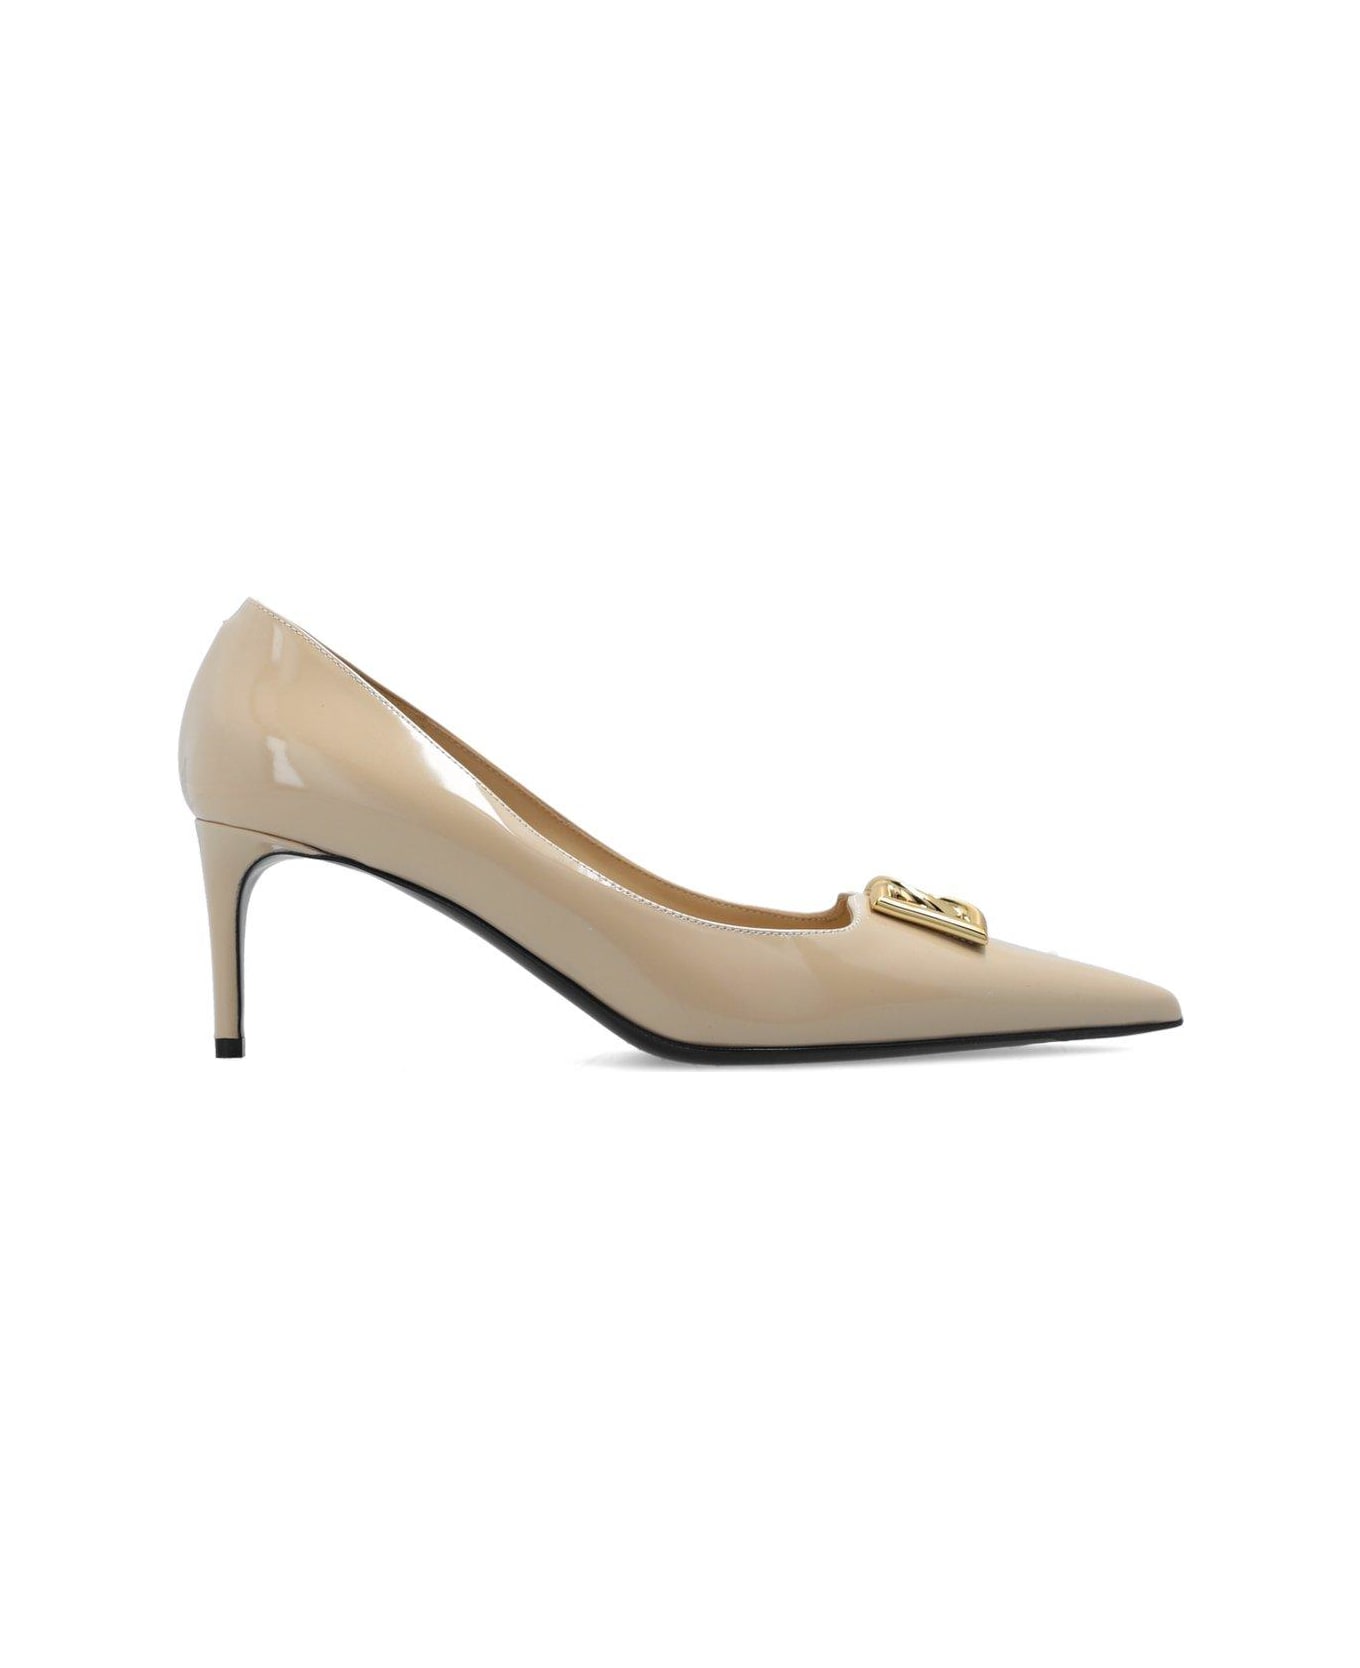 Dolce & Gabbana Dg Plaque Pointed Toe Pumps ハイヒール